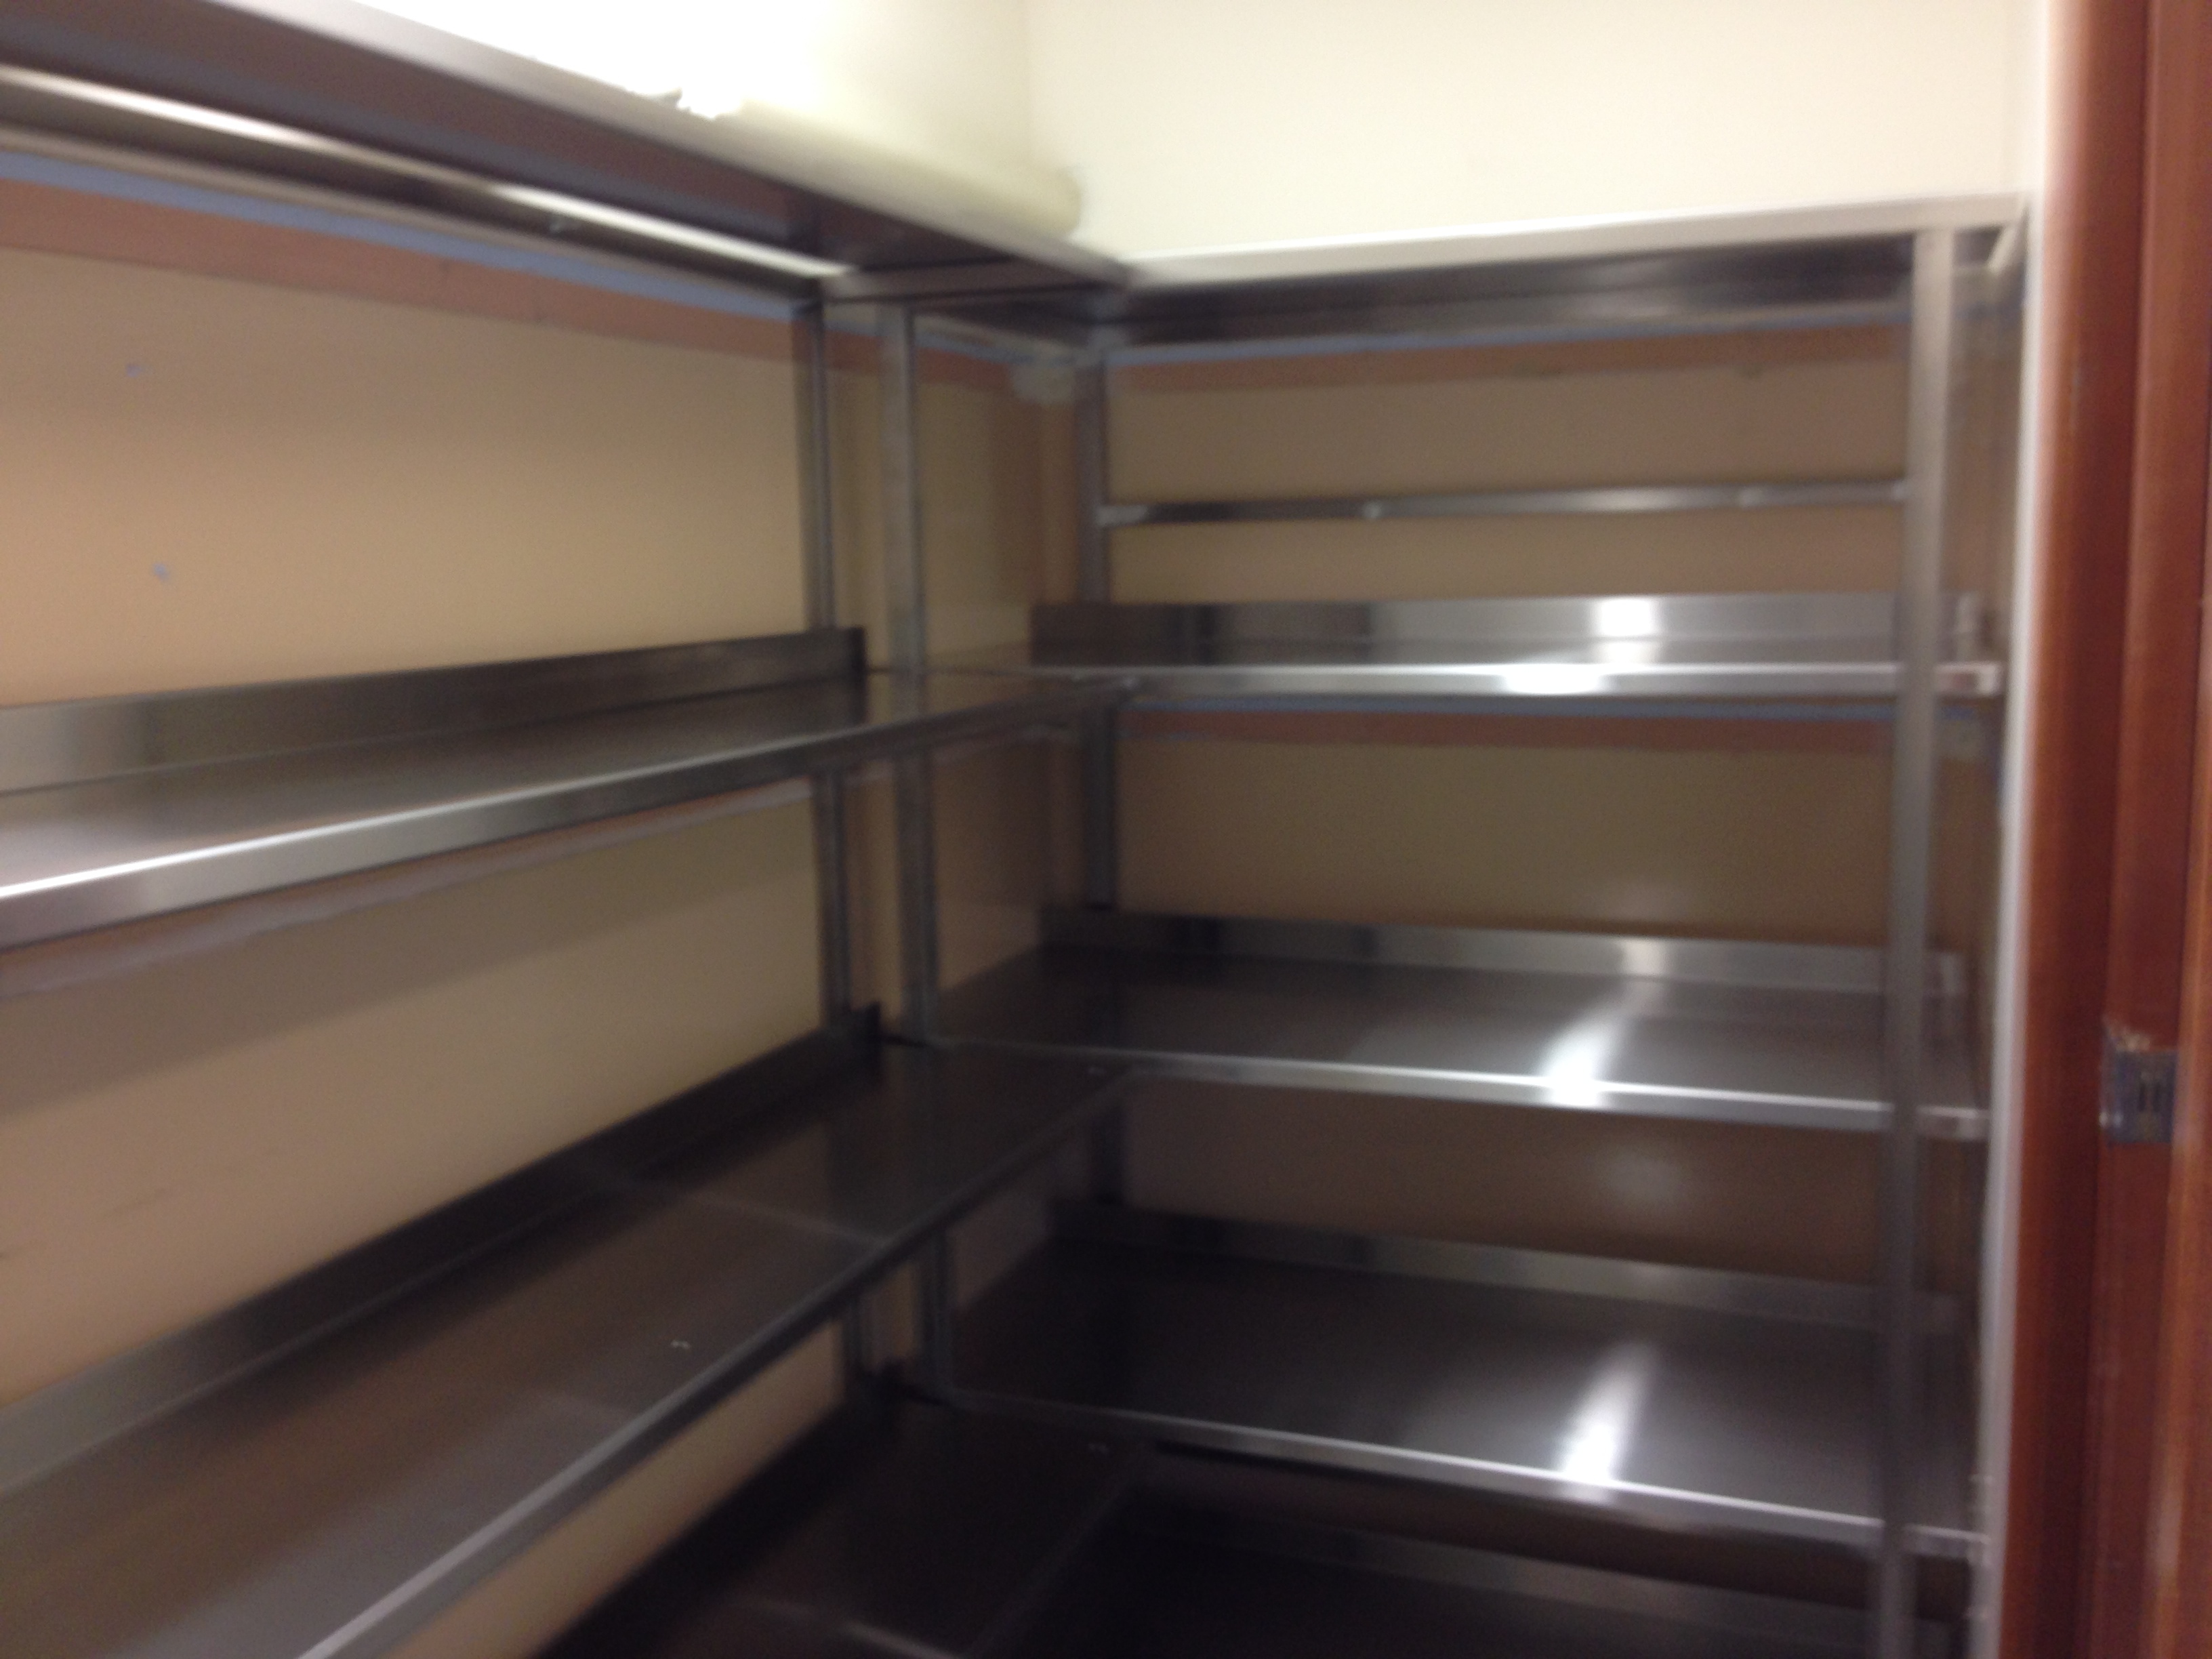 Stainless Steel Pantry Shelving